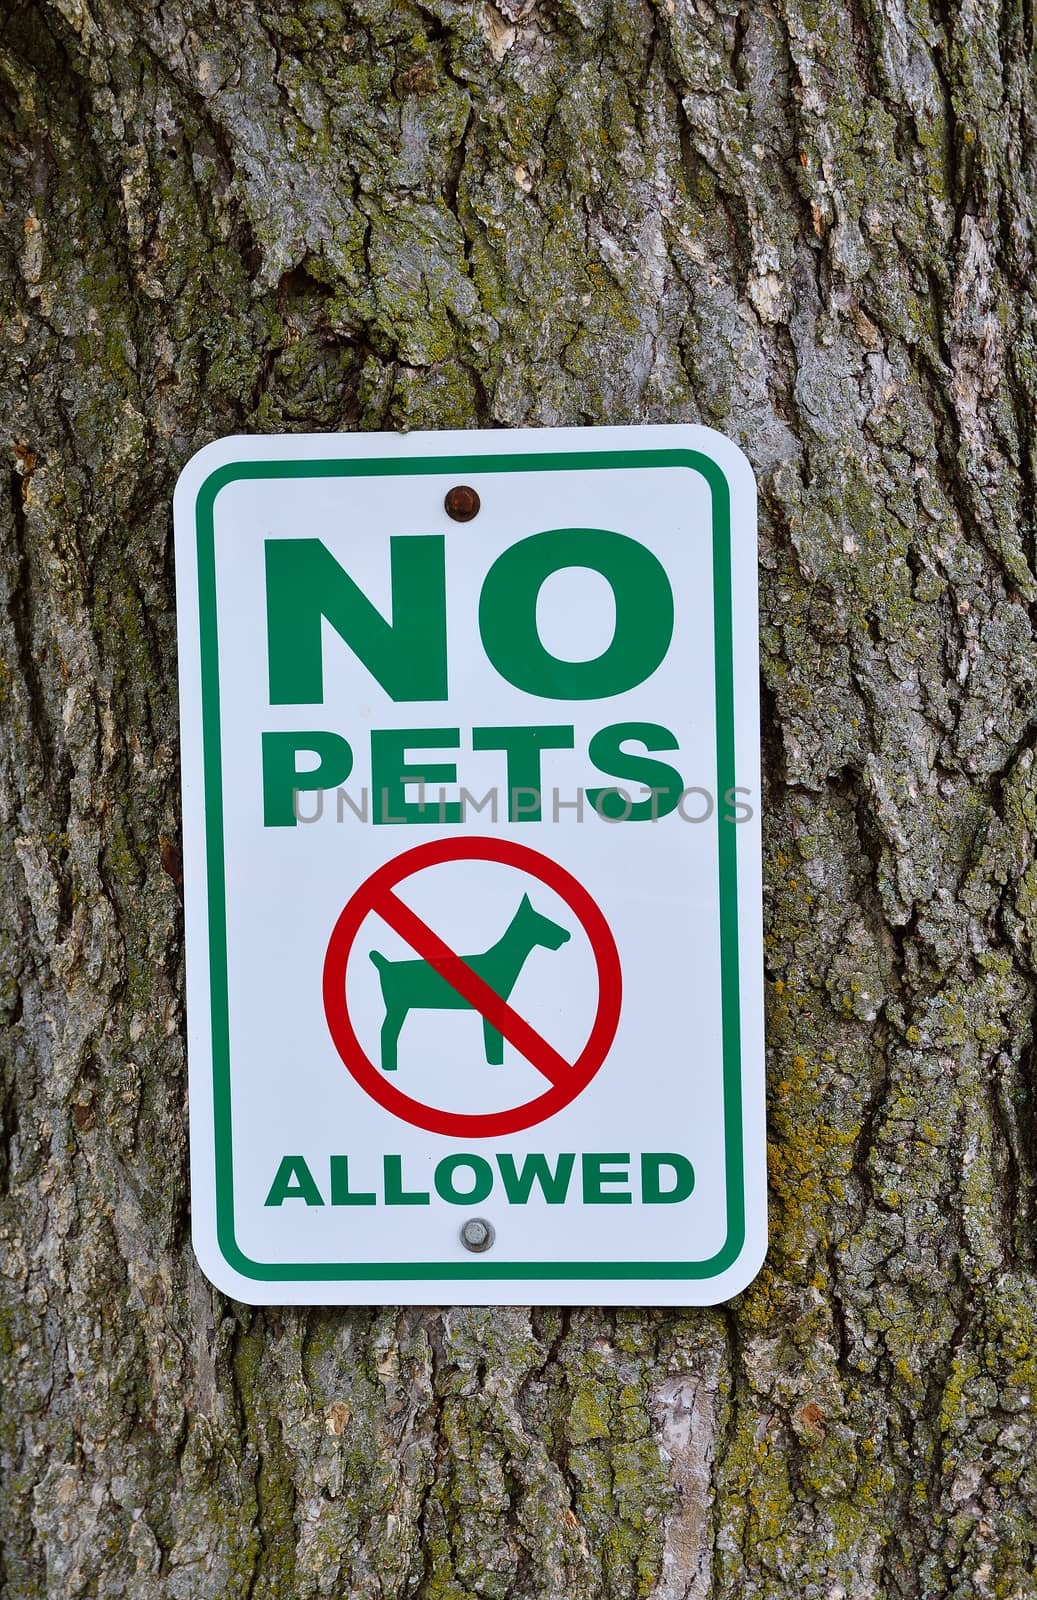 No pets allowed sign on tree. by CreativePhotoSpain